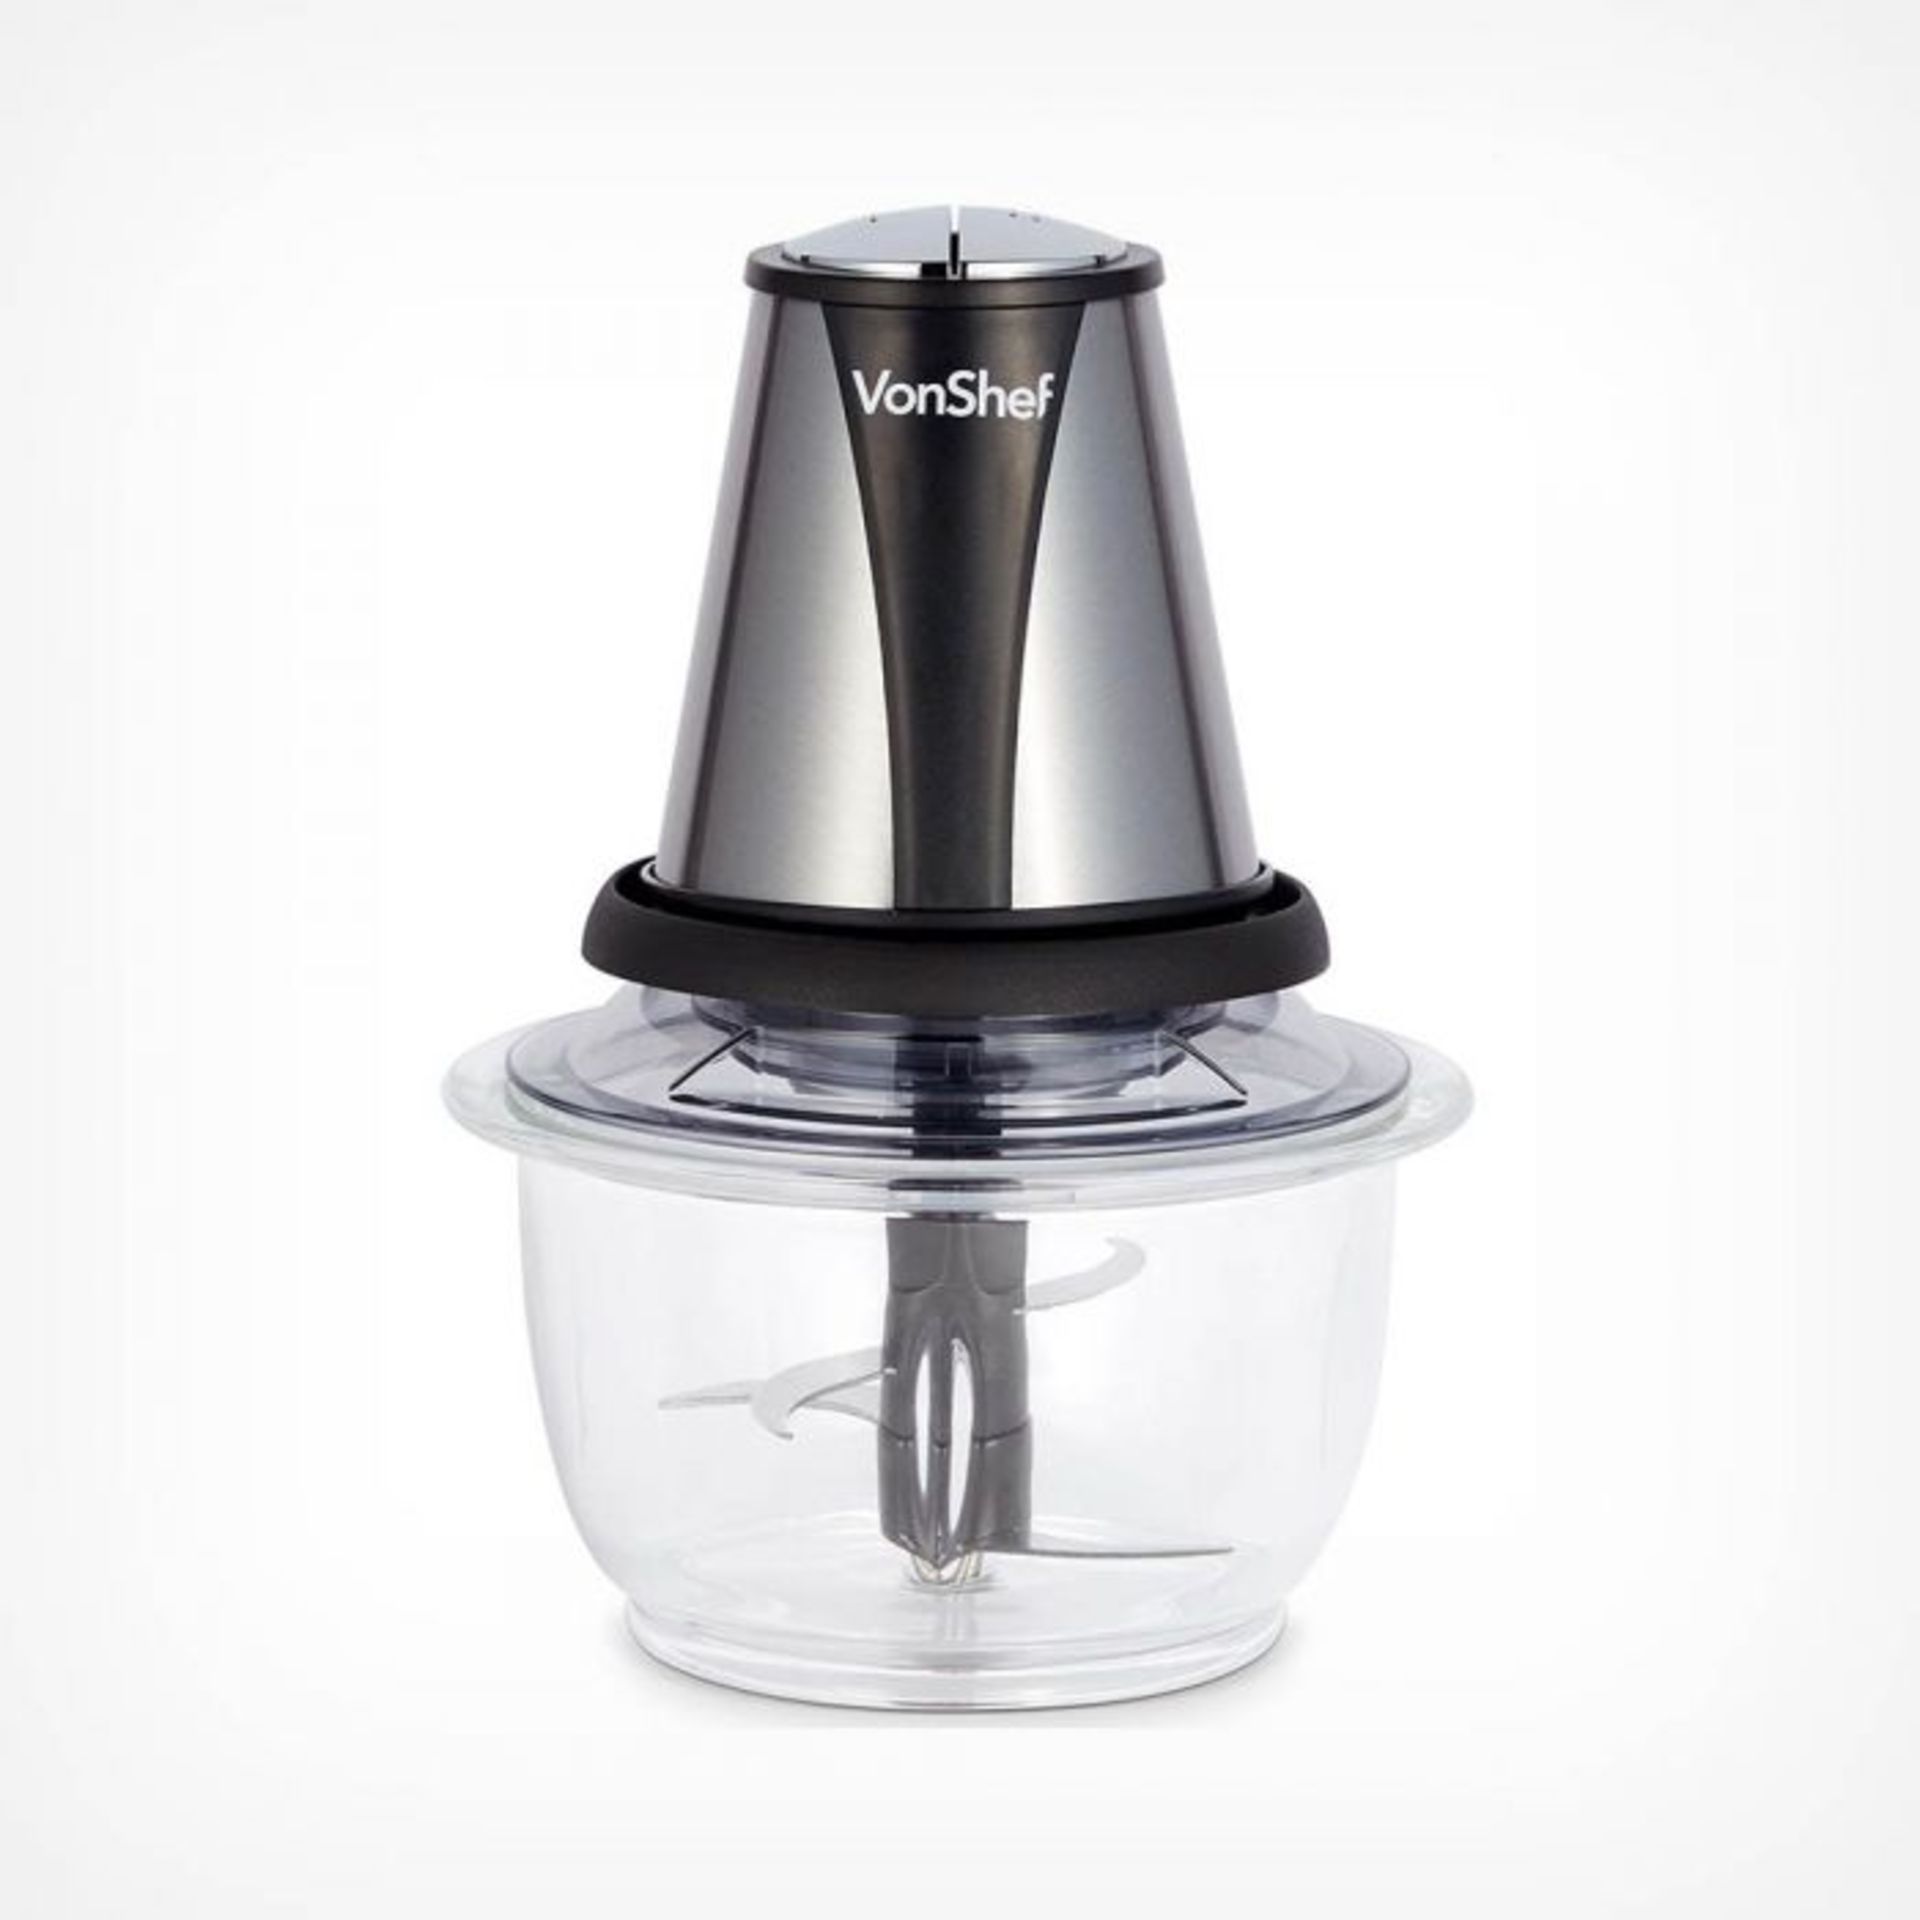 Mini Food Chopper 400W. Change the way you prepare food forever with this powerful and versatile